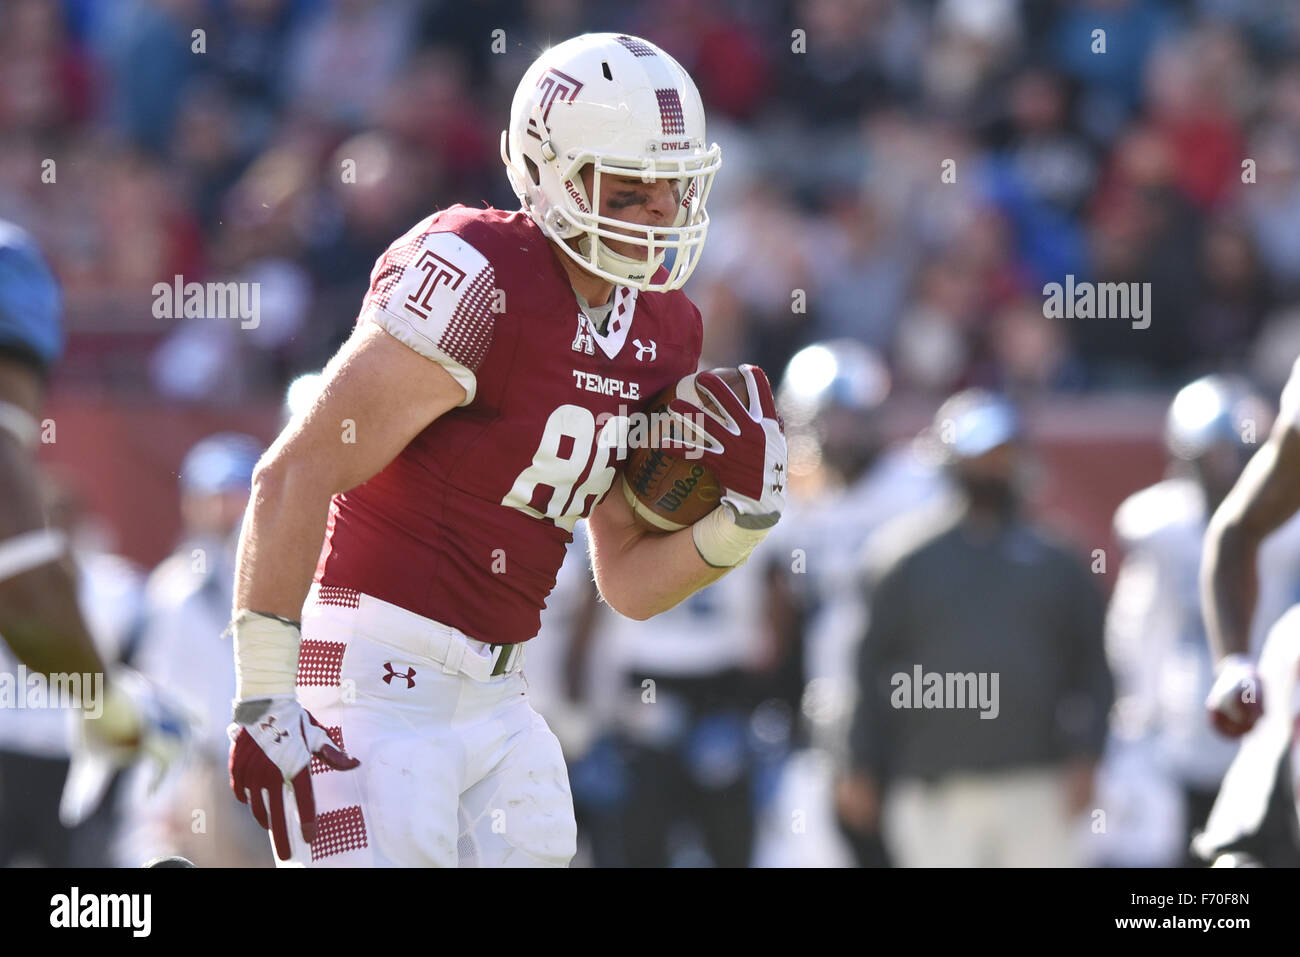 Philadelphia, Pennsylvania, USA. 21st Nov, 2015. Temple Owls tight end COLIN THOMPSON (86) runs with the ball during the American Athletic Conference football game at Lincoln Financial Field. The Owls beat the Tigers 31-12. © Ken Inness/ZUMA Wire/Alamy Live News Stock Photo